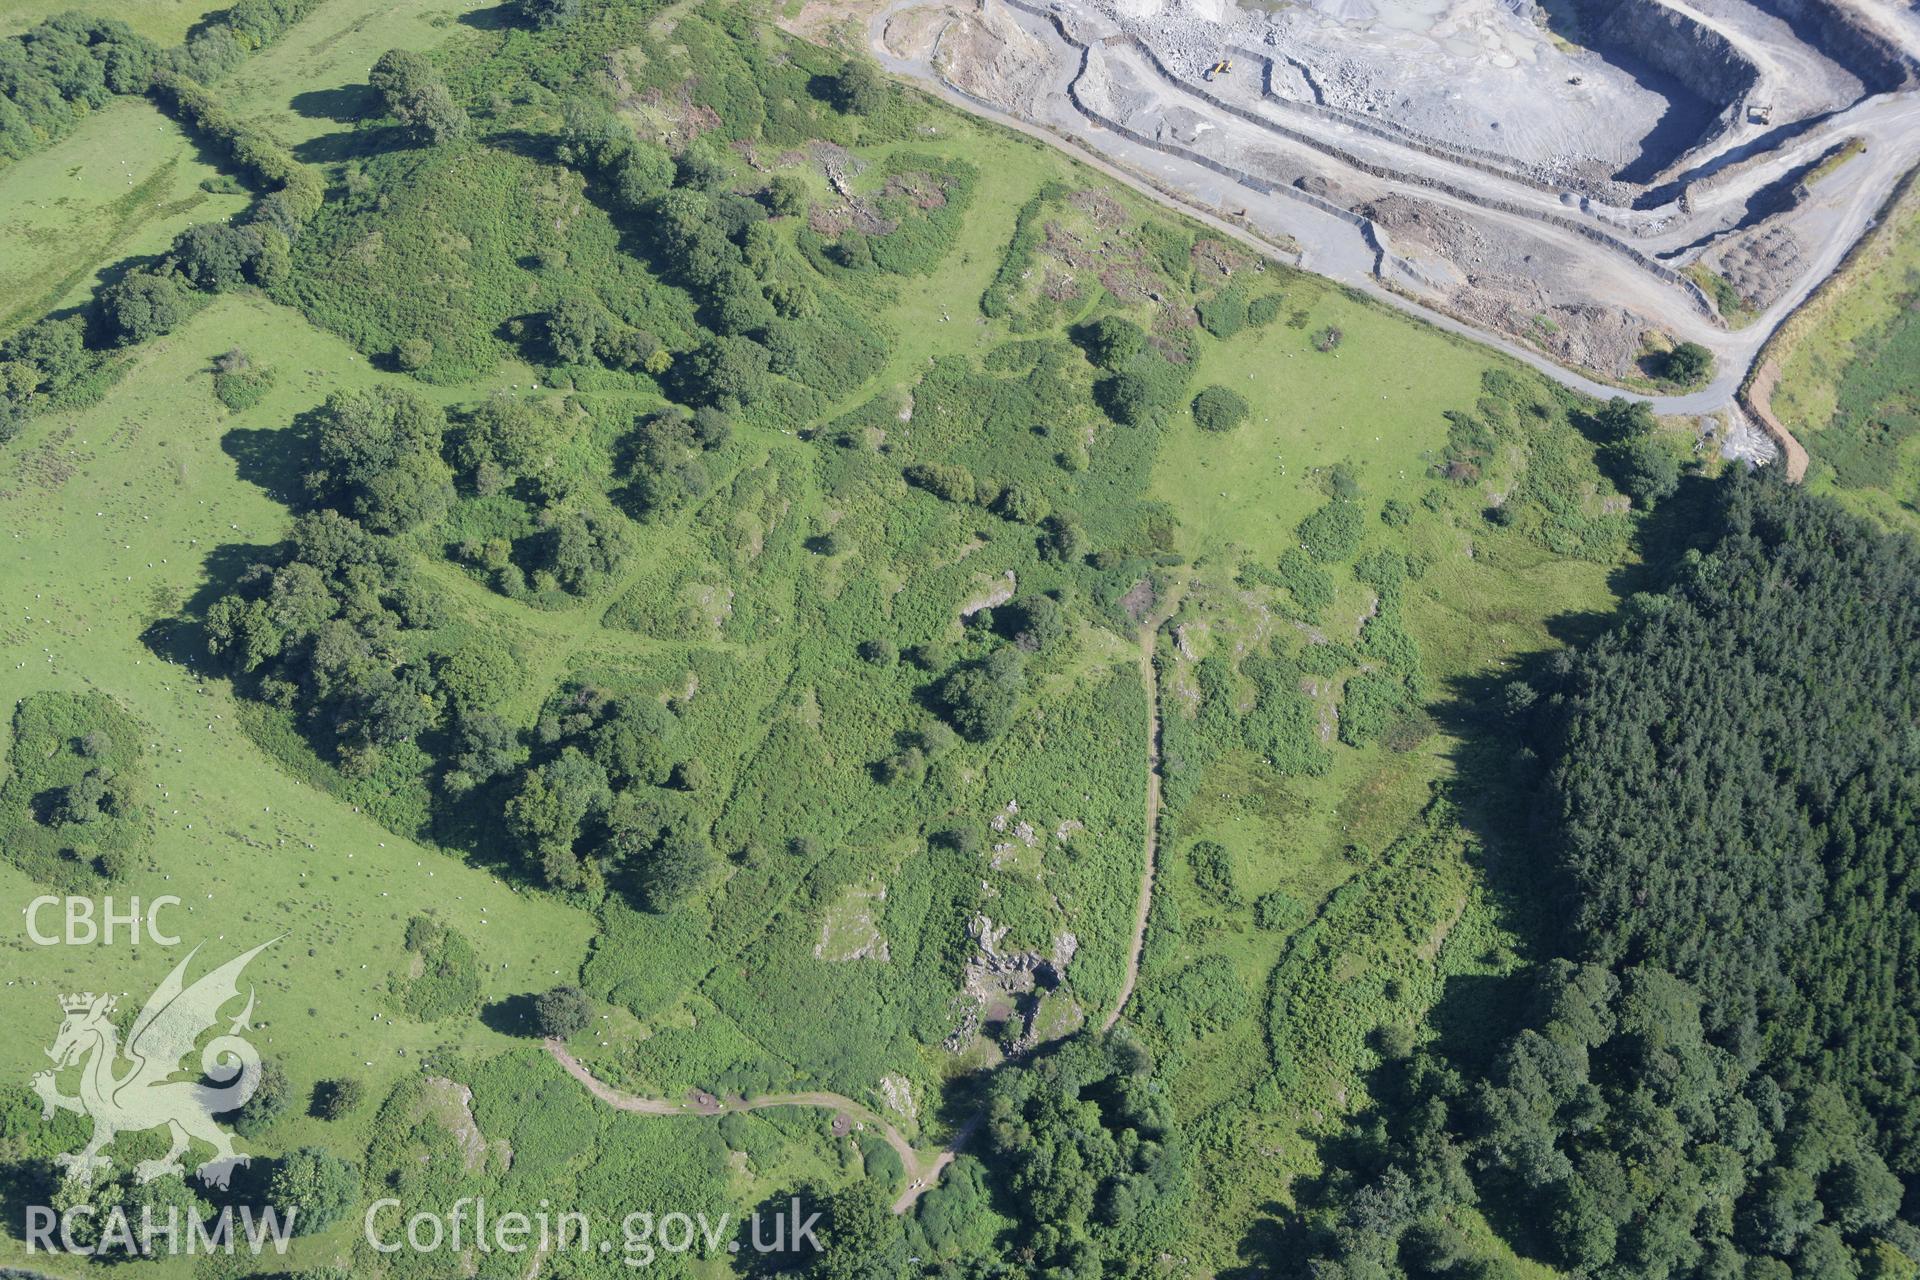 RCAHMW colour oblique aerial photograph of cairns near Llanelwedd Stone Quarry. Taken on 08 August 2007 by Toby Driver